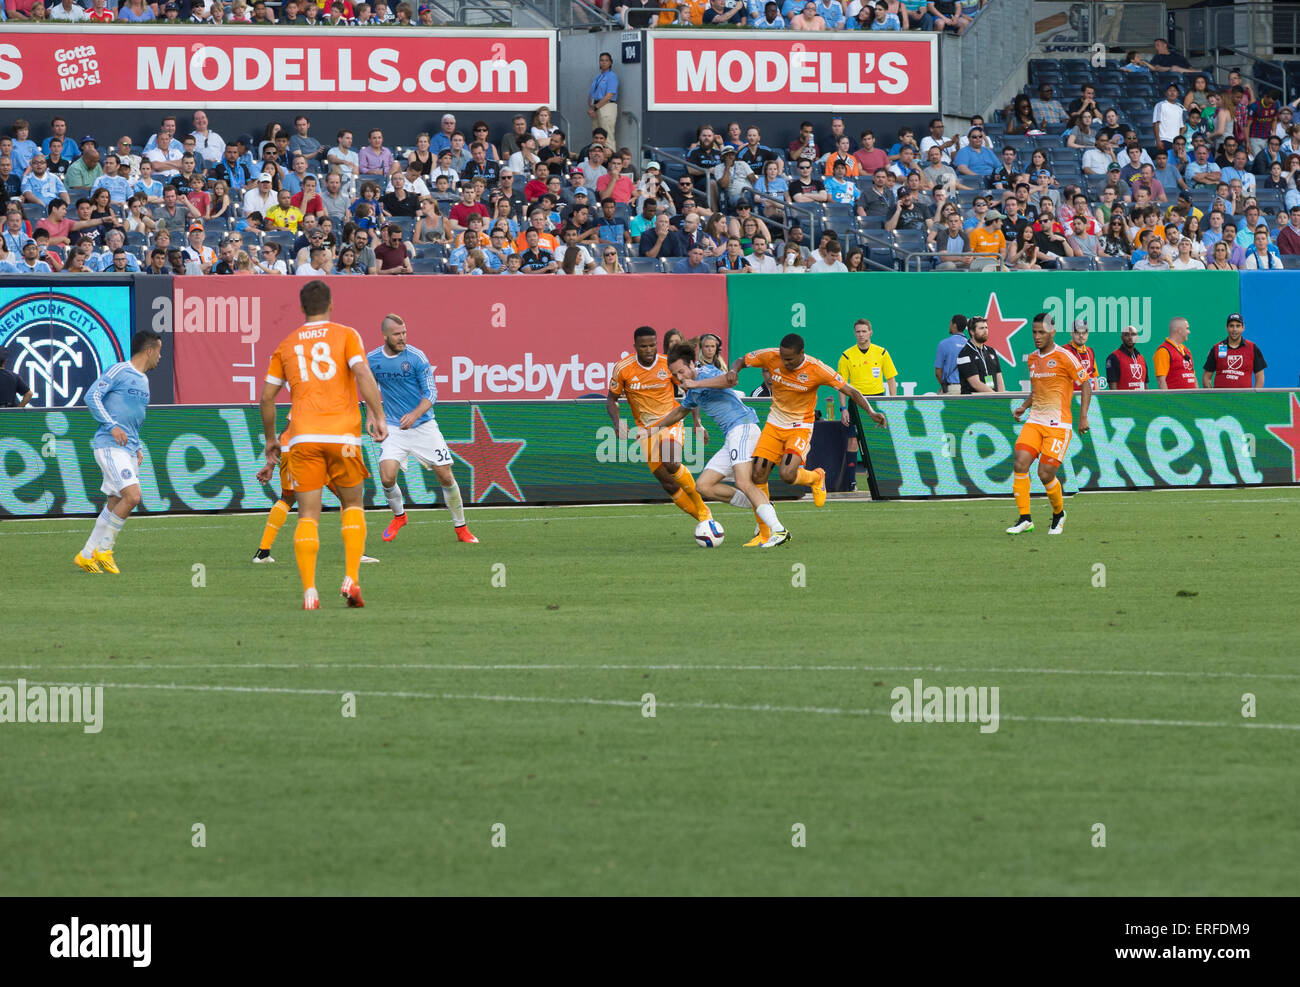 New York, NY - May 30, 2015: Mix Diskerud (10) of NYCFC & Ricardo Clark (13) of Houston Dynamo fight for ball during the game between New York City Football Club and Houston Dynamo at Yankee Stadium Stock Photo